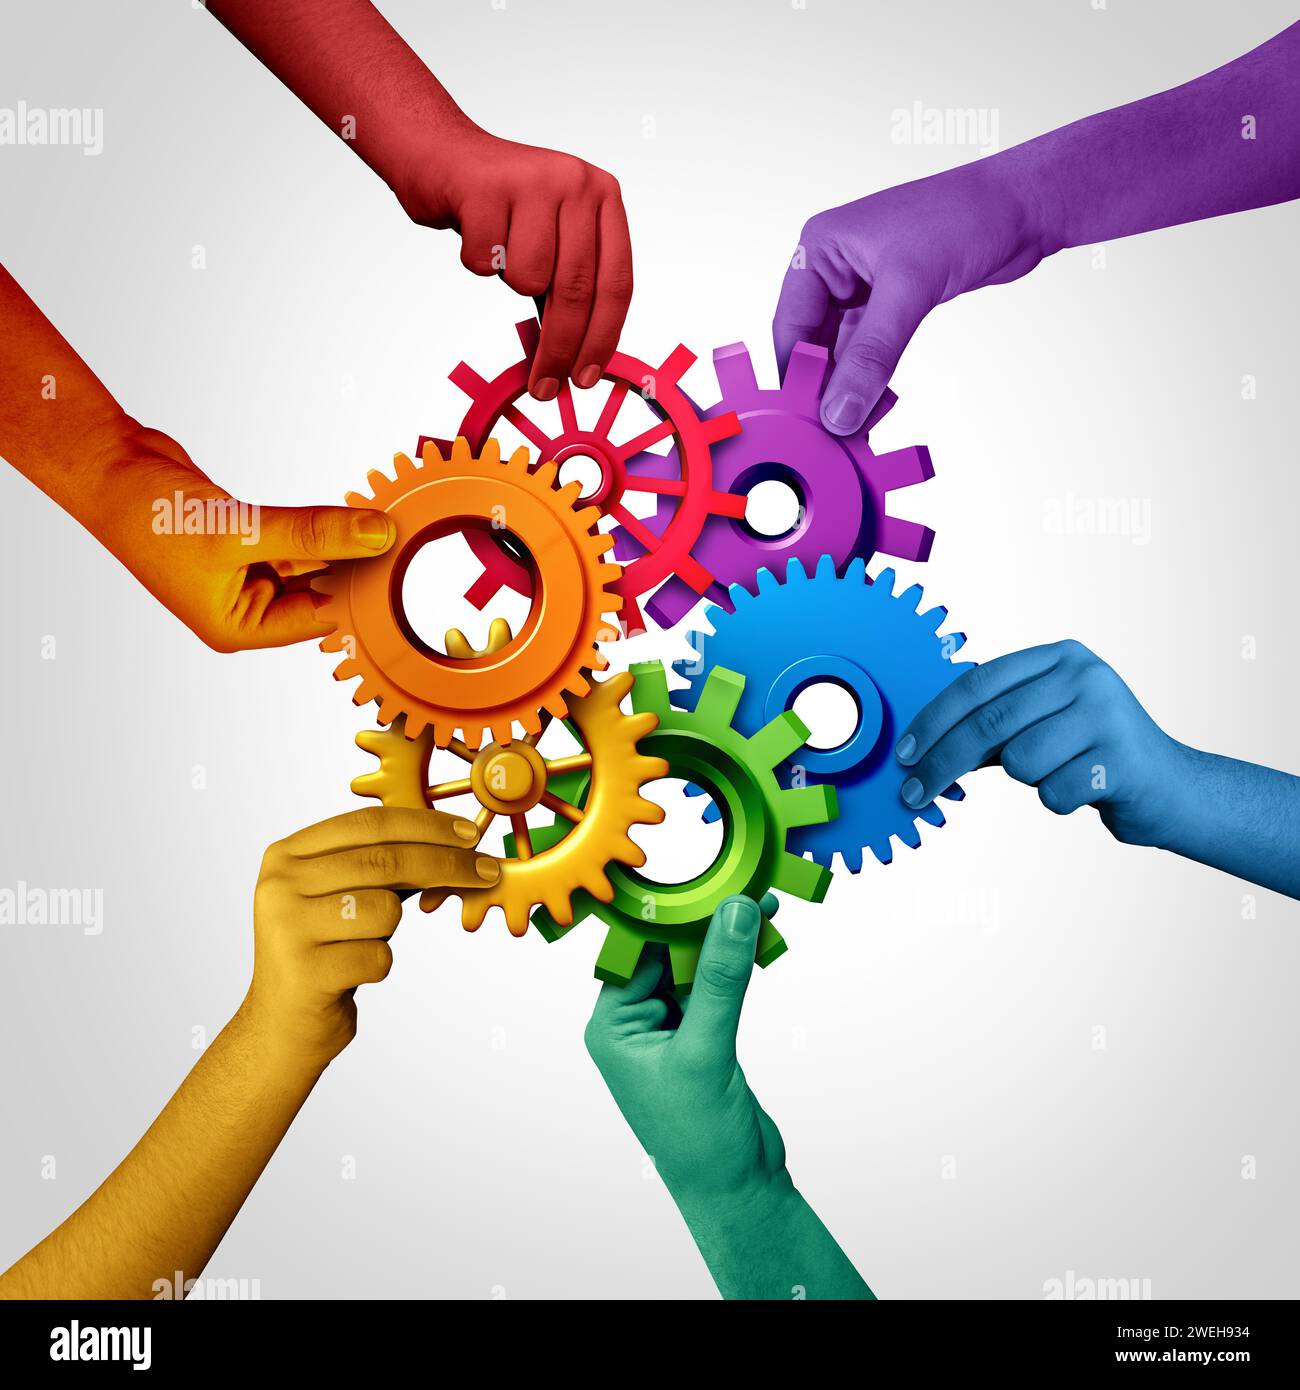 Diversity equity and inclusion or DEI concept as a group of diverse people working together as a symbol of equality belonging and inclusiveness Stock Photo